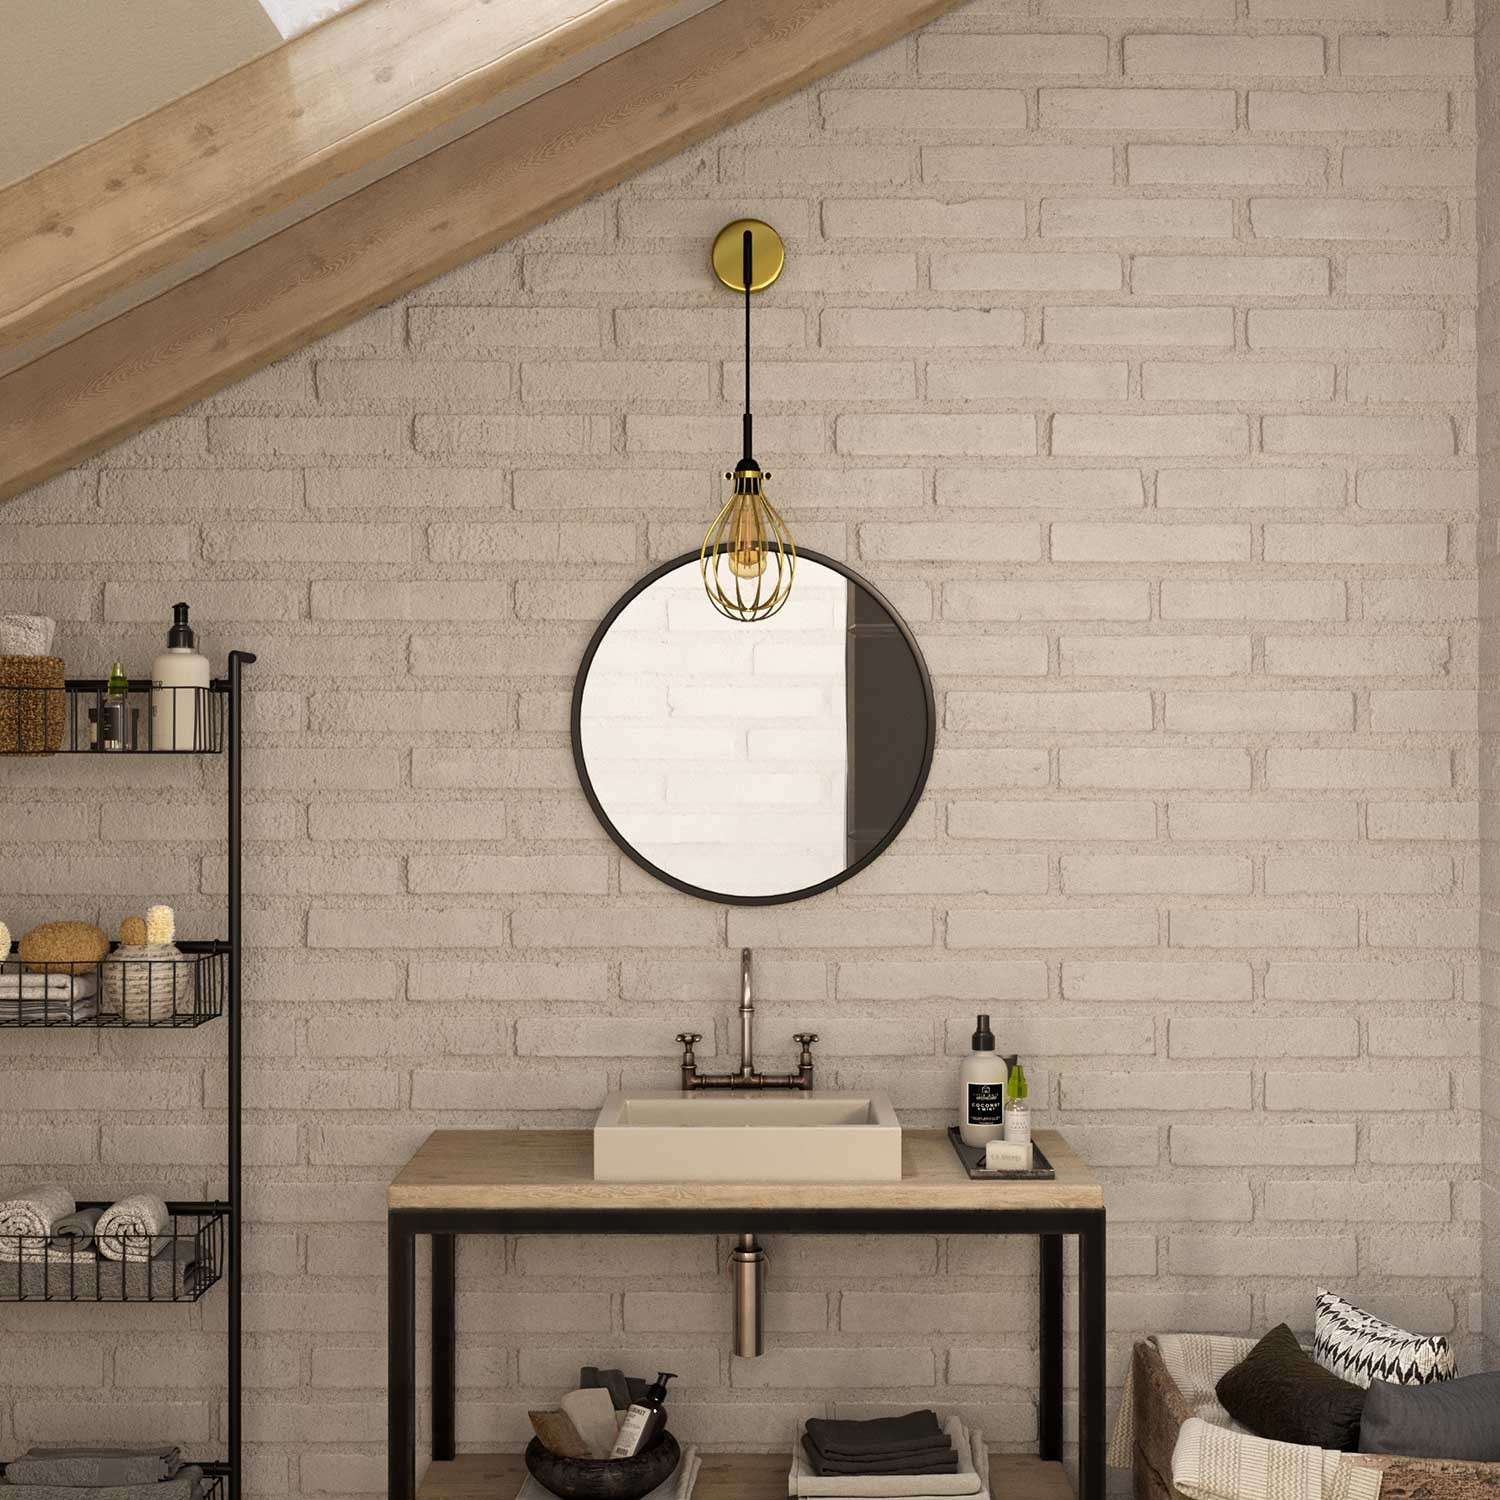 Fermaluce Metal wall light with pendant Drop lampshade and bent extension